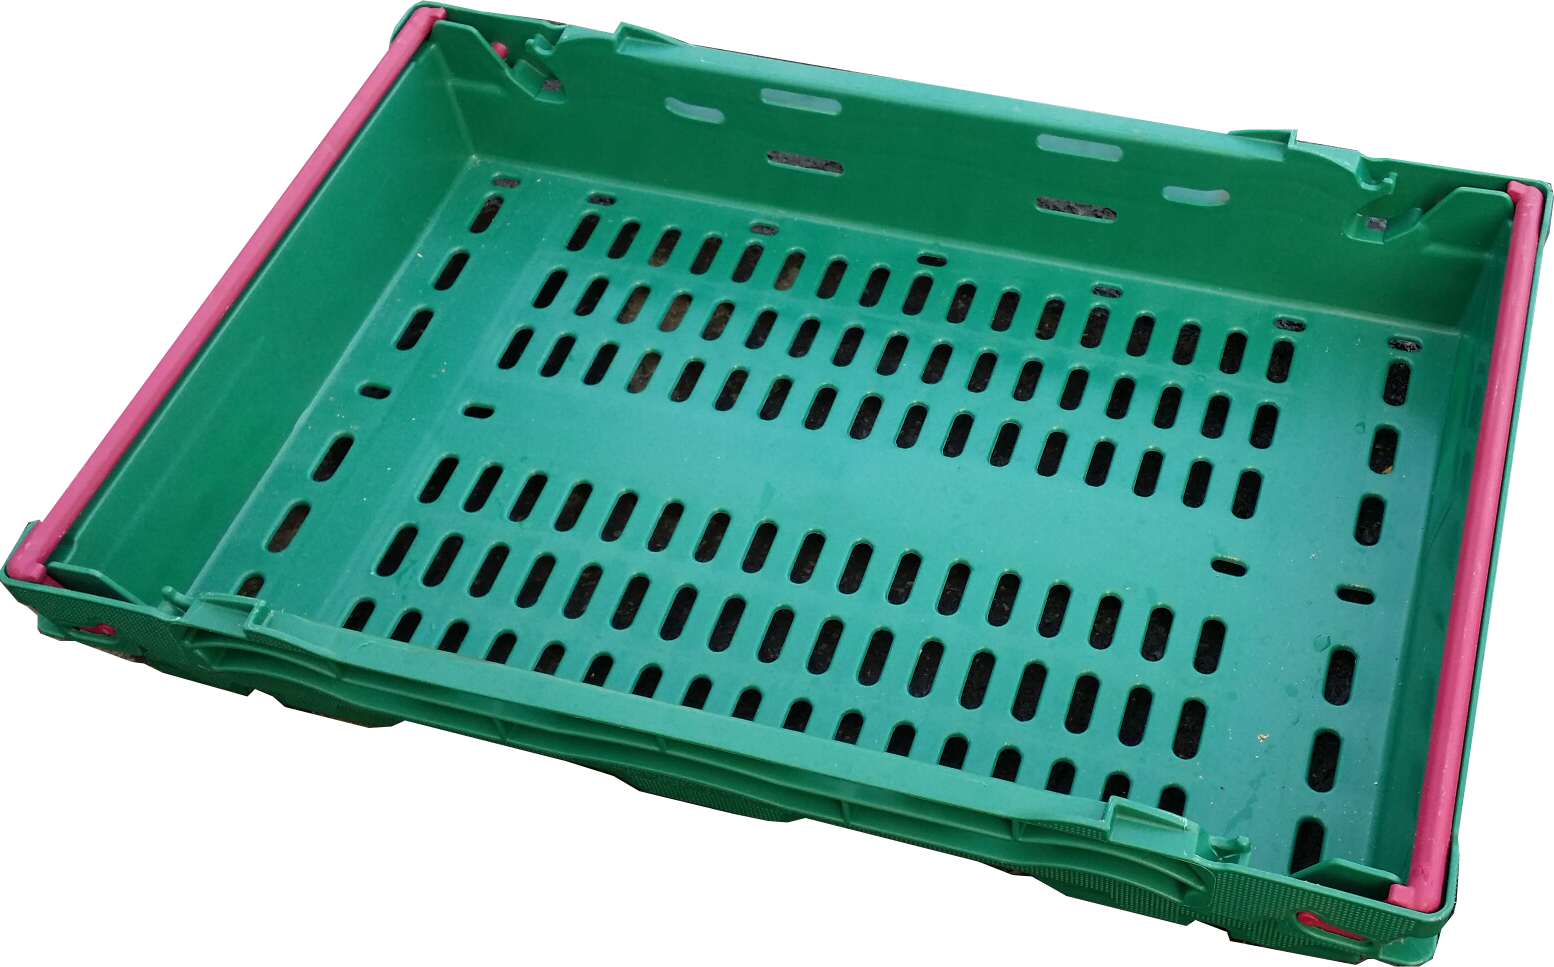 UK Suppliers Of Saeplast 660 Container (628 Ltrs) For Food Processing Sector